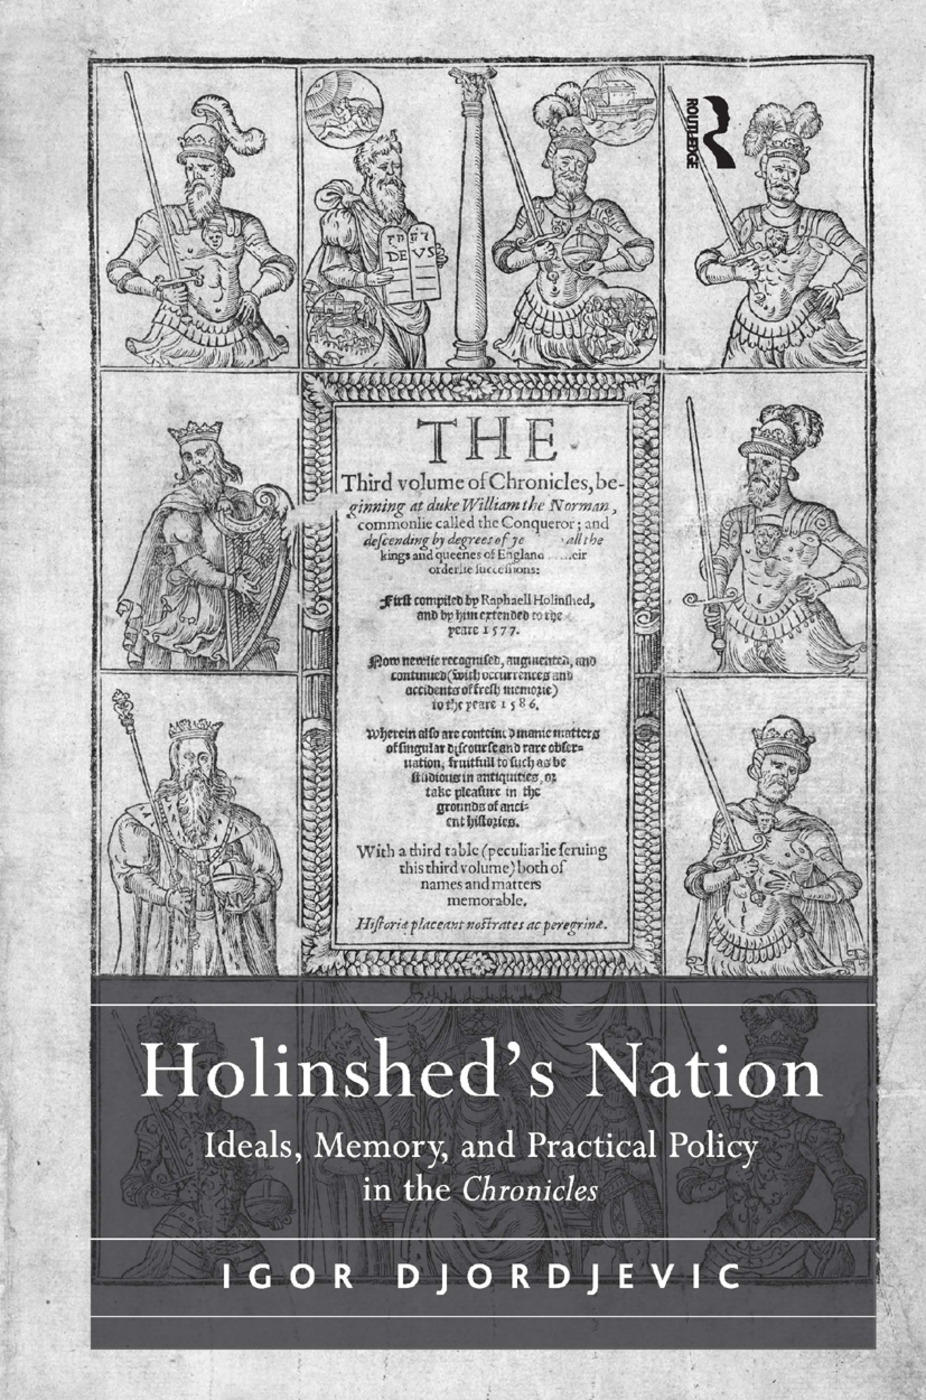 Holinshed’s Nation: Ideals, Memory, and Practical Policy in the Chronicles. Igor Djordjevic